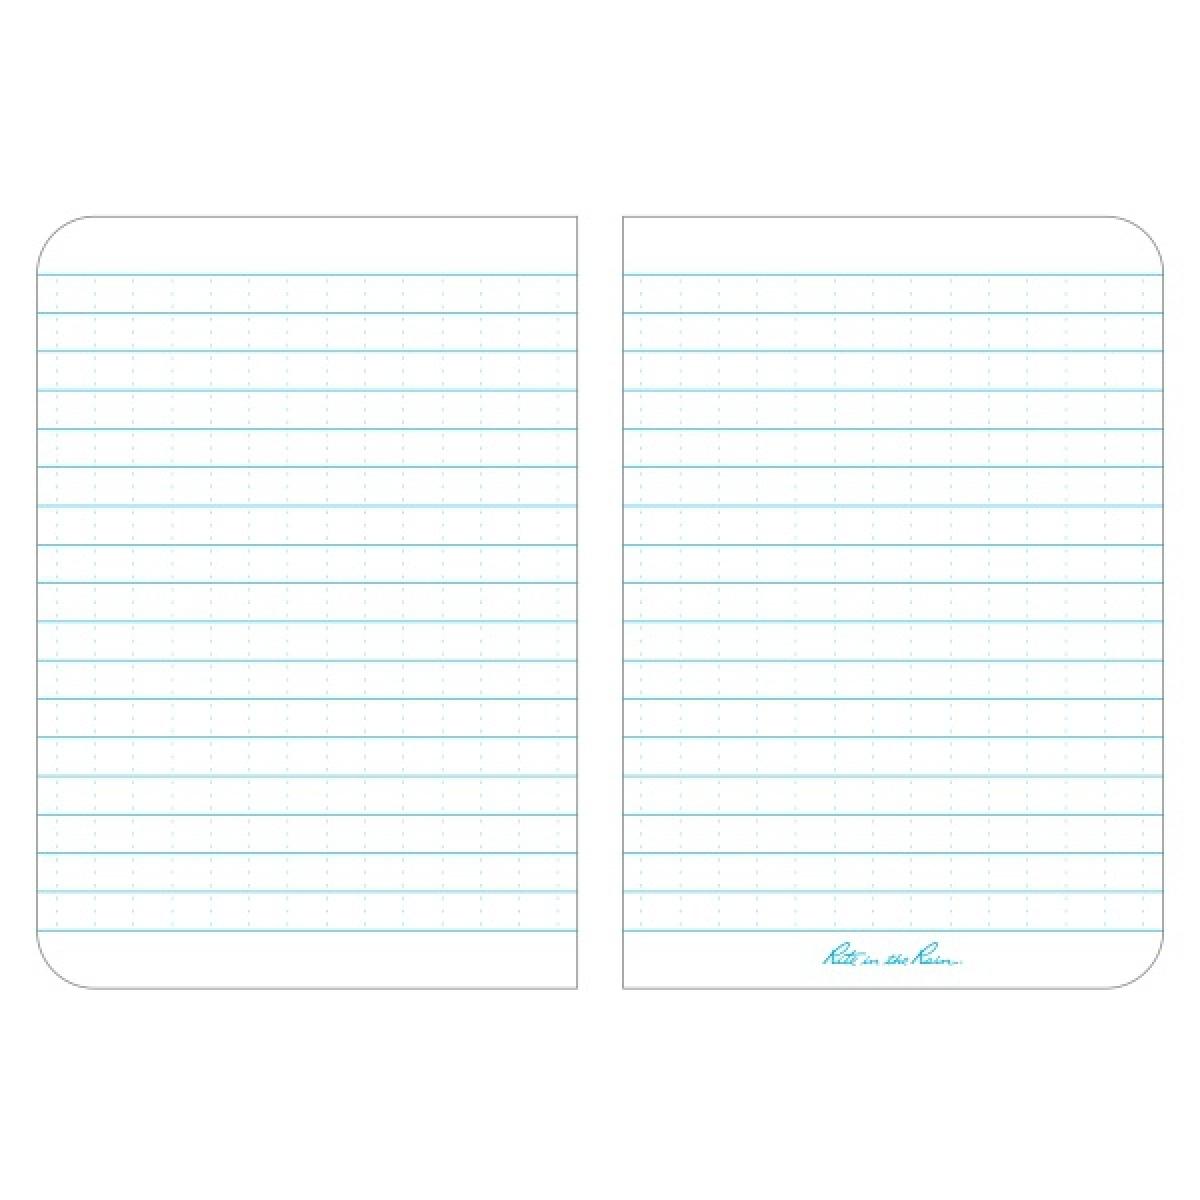 All-Weather Universal Notebook Blue 3 pack